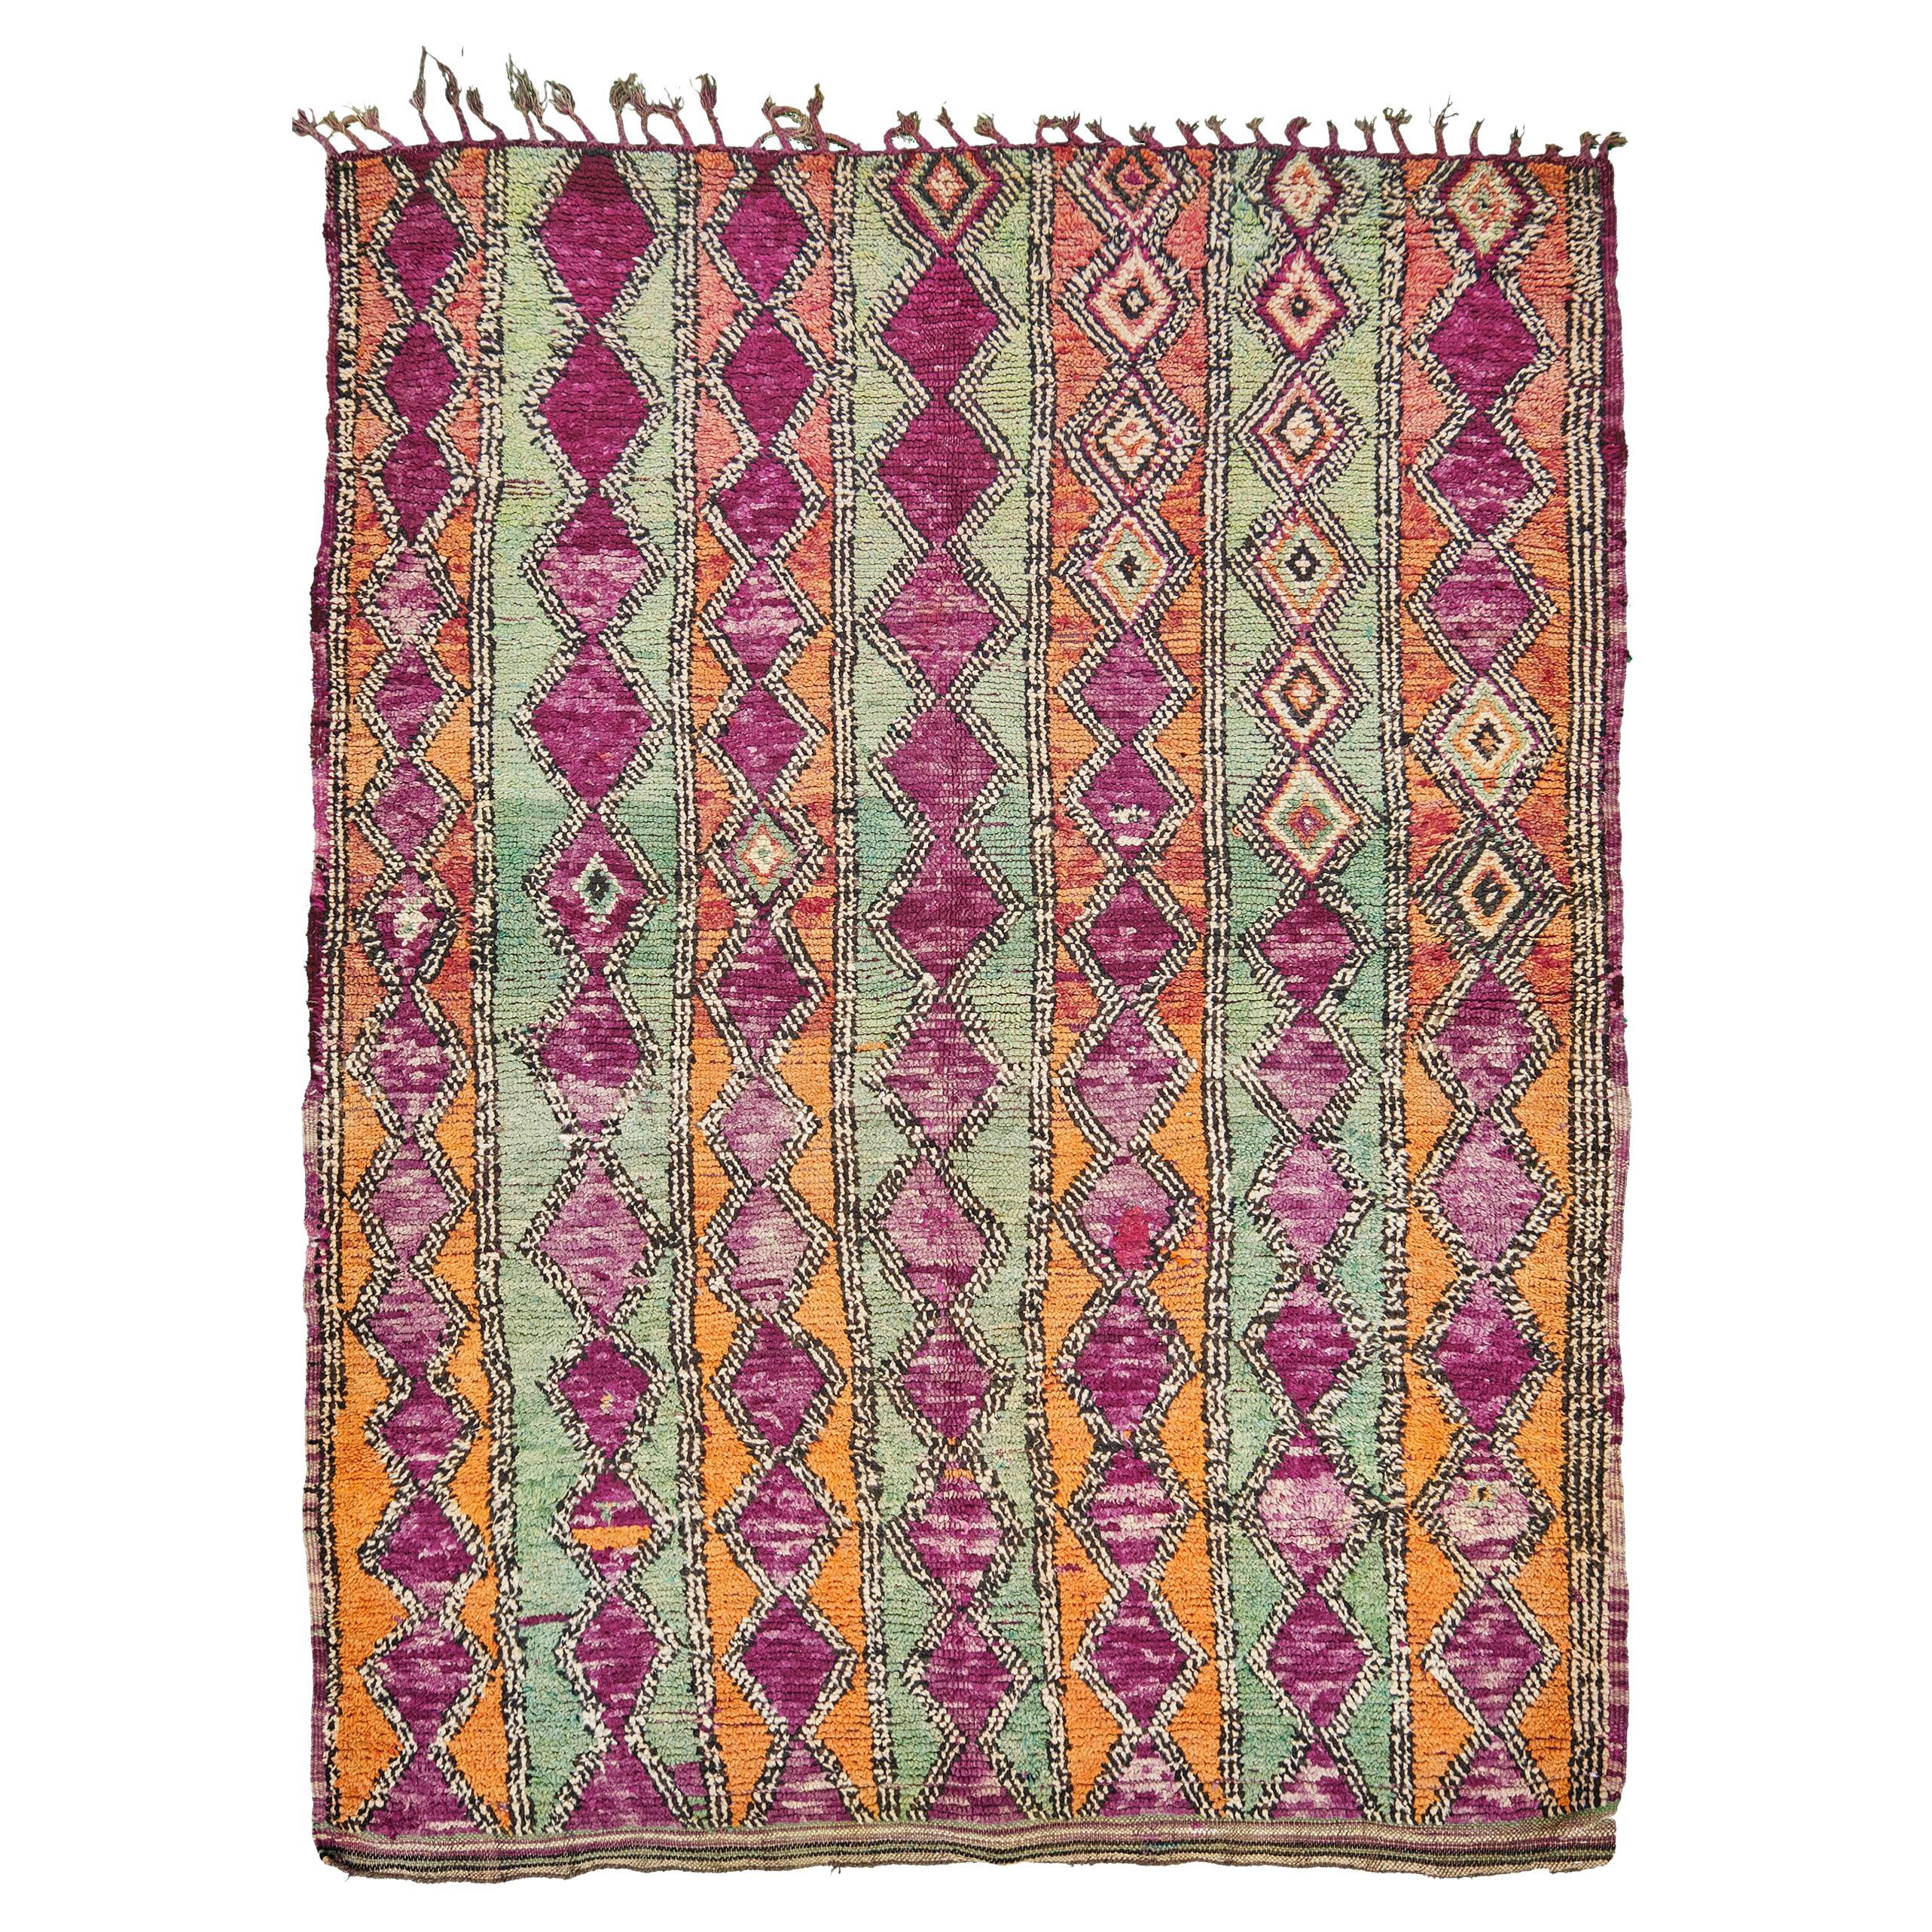 Vintage Moroccan Beni Ourain Tribe Rug by Mehraban Rugs For Sale